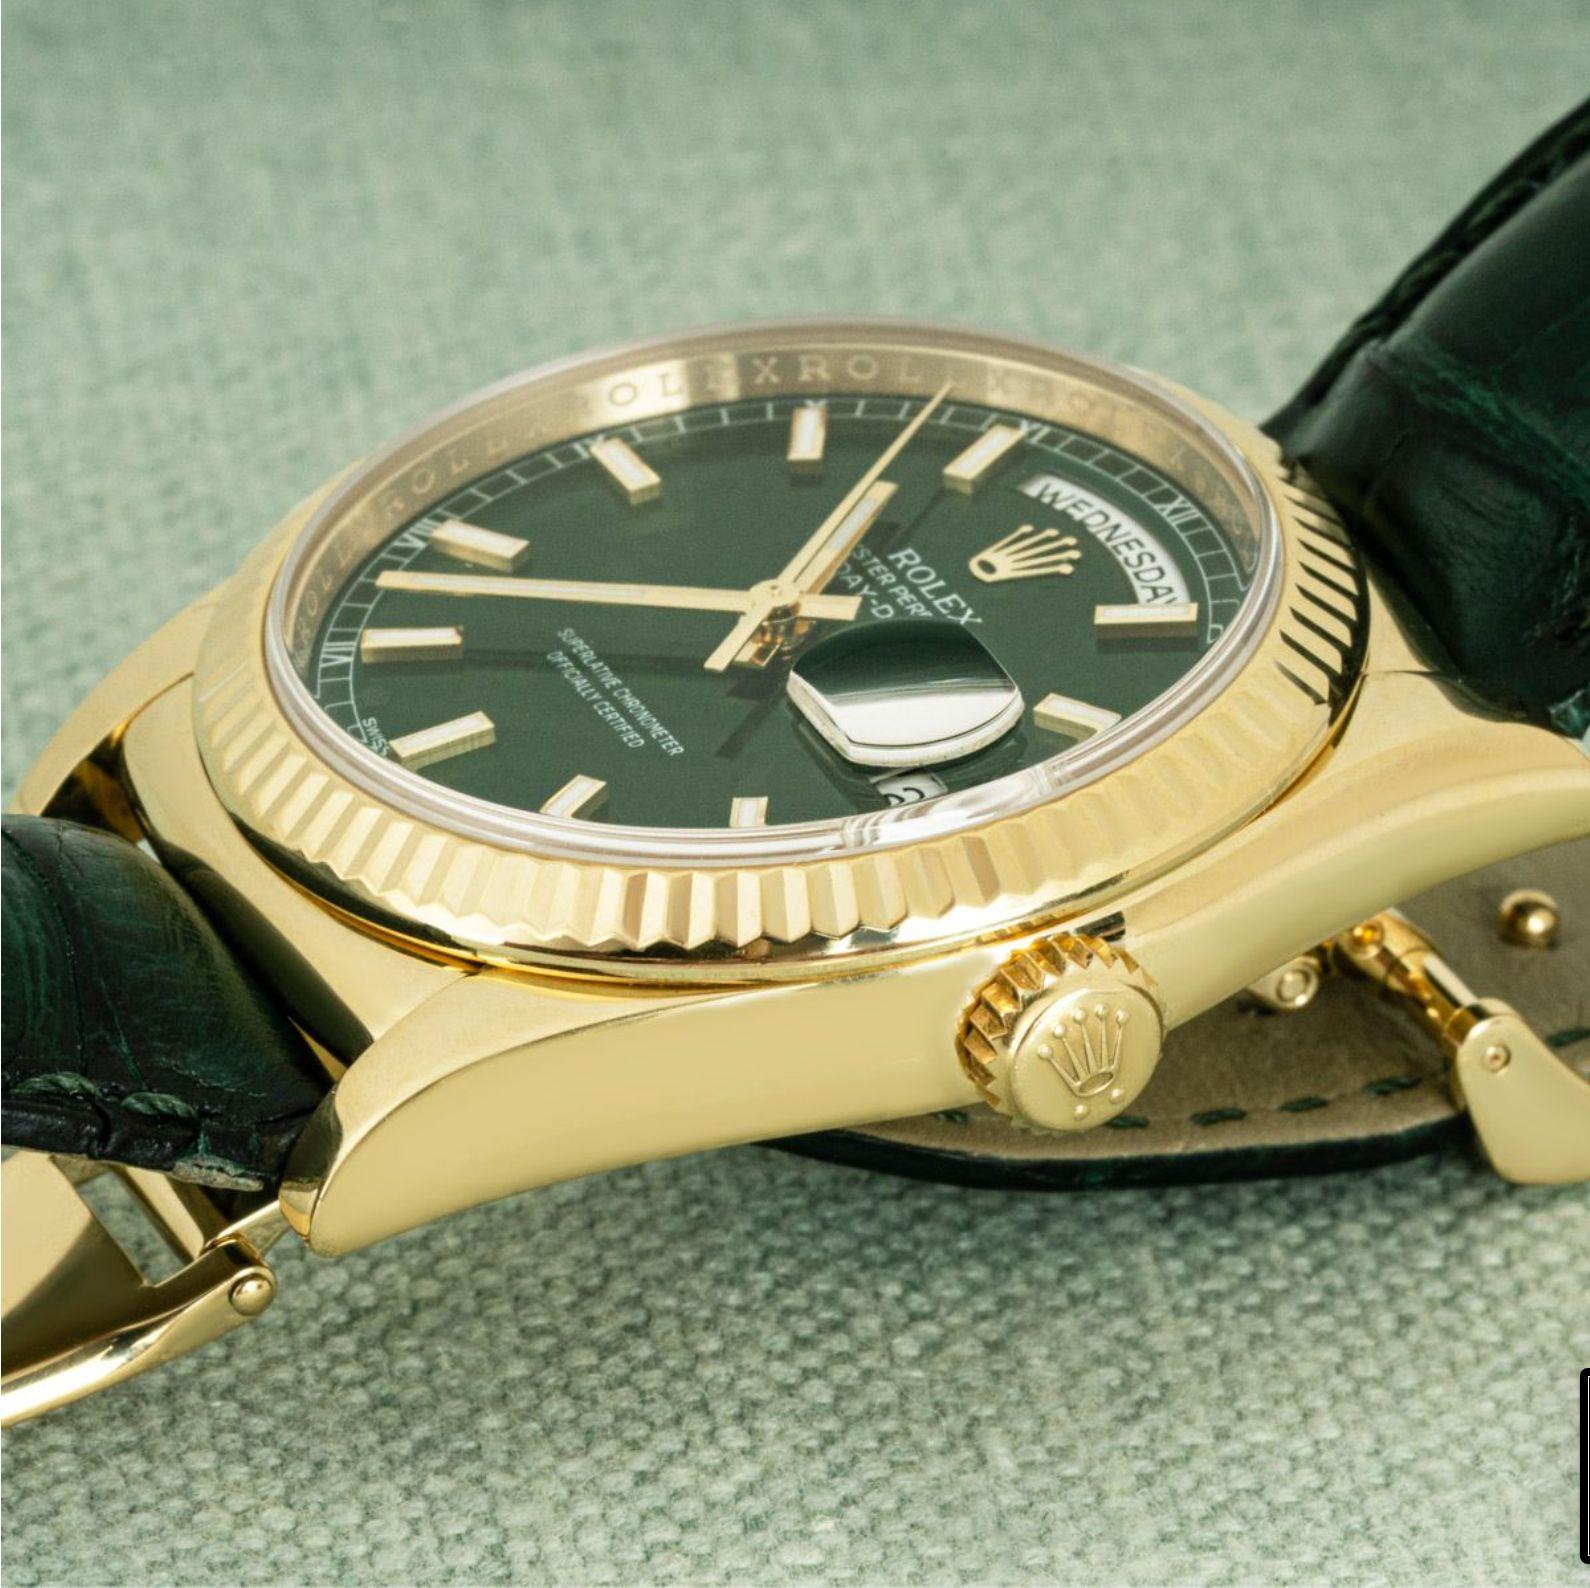 A 36mm Day-Date in yellow gold by Rolex. Featuring a desirable green dial and fluted bezel. Complimenting the dial is a Rolex green leather strap equipped with an original yellow gold folding clasp. Fitted with a sapphire crystal and a self-winding